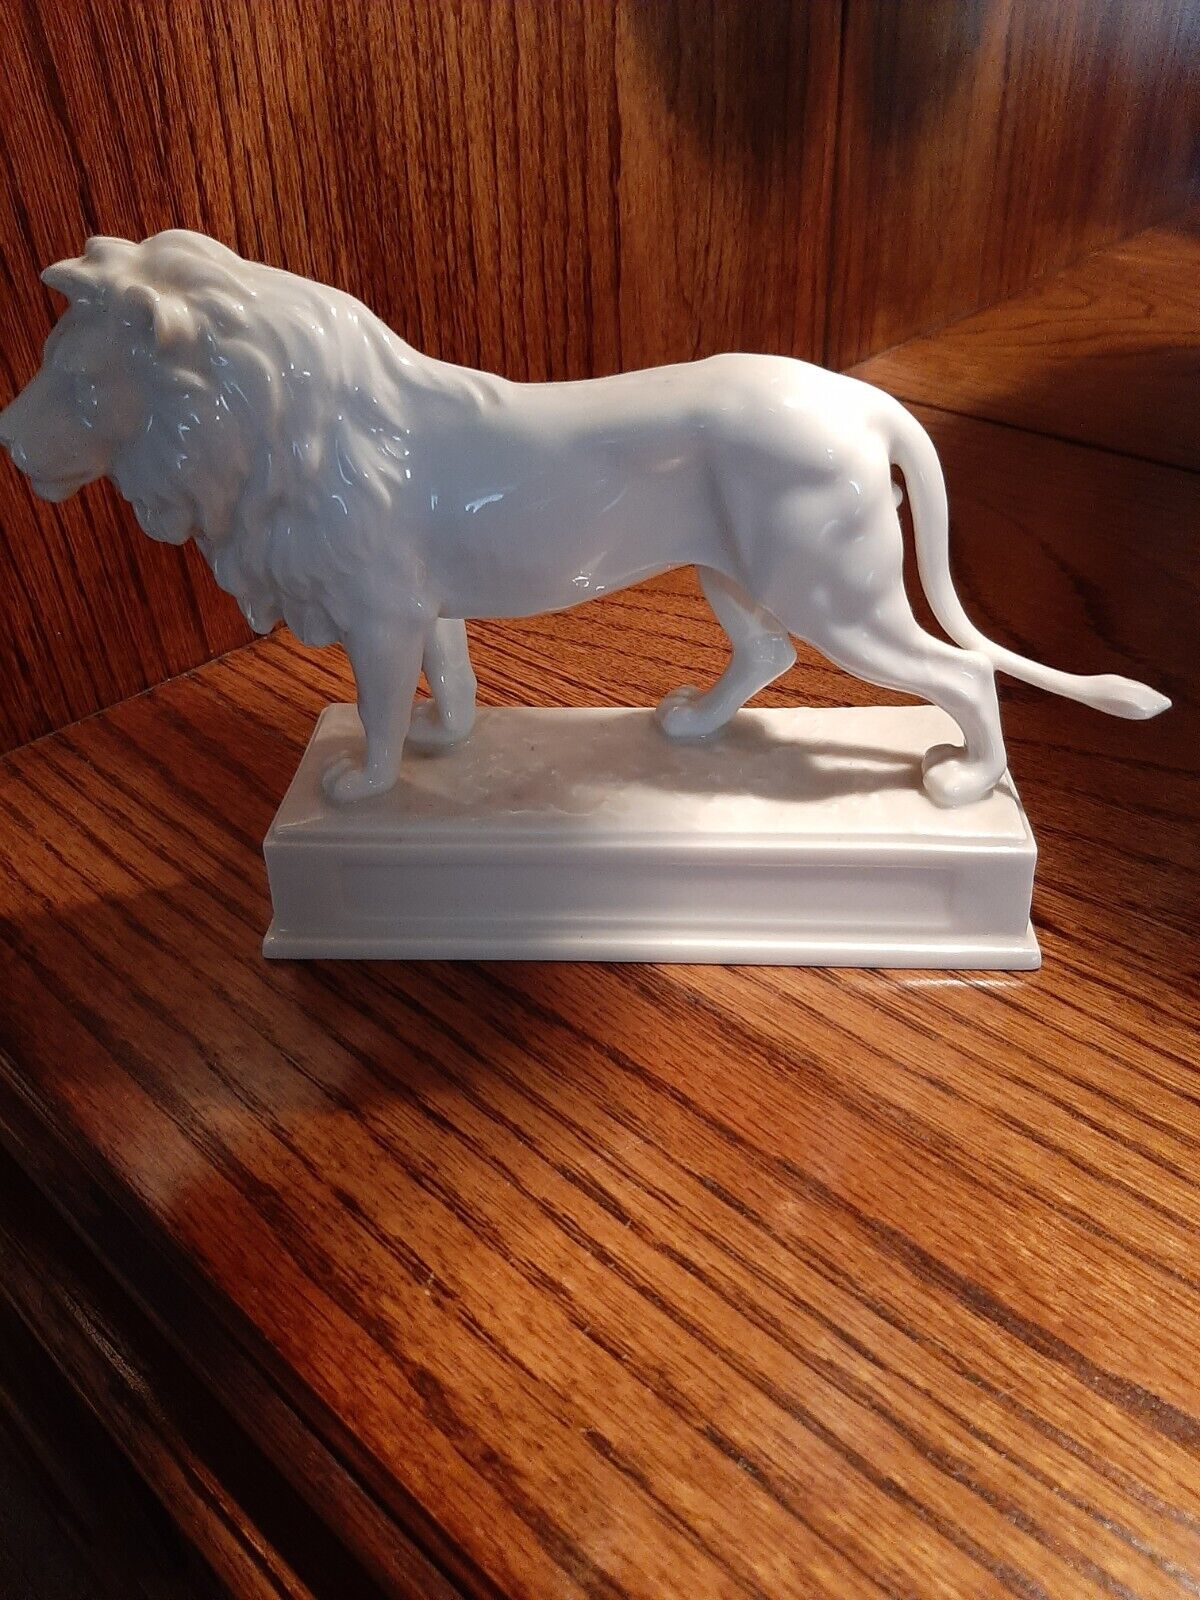 HUTSCHENREUTHER PORCELAIN LION  FIGURINE.  SMALLER SIZE.  VERY LOW 3 DAY PRICE